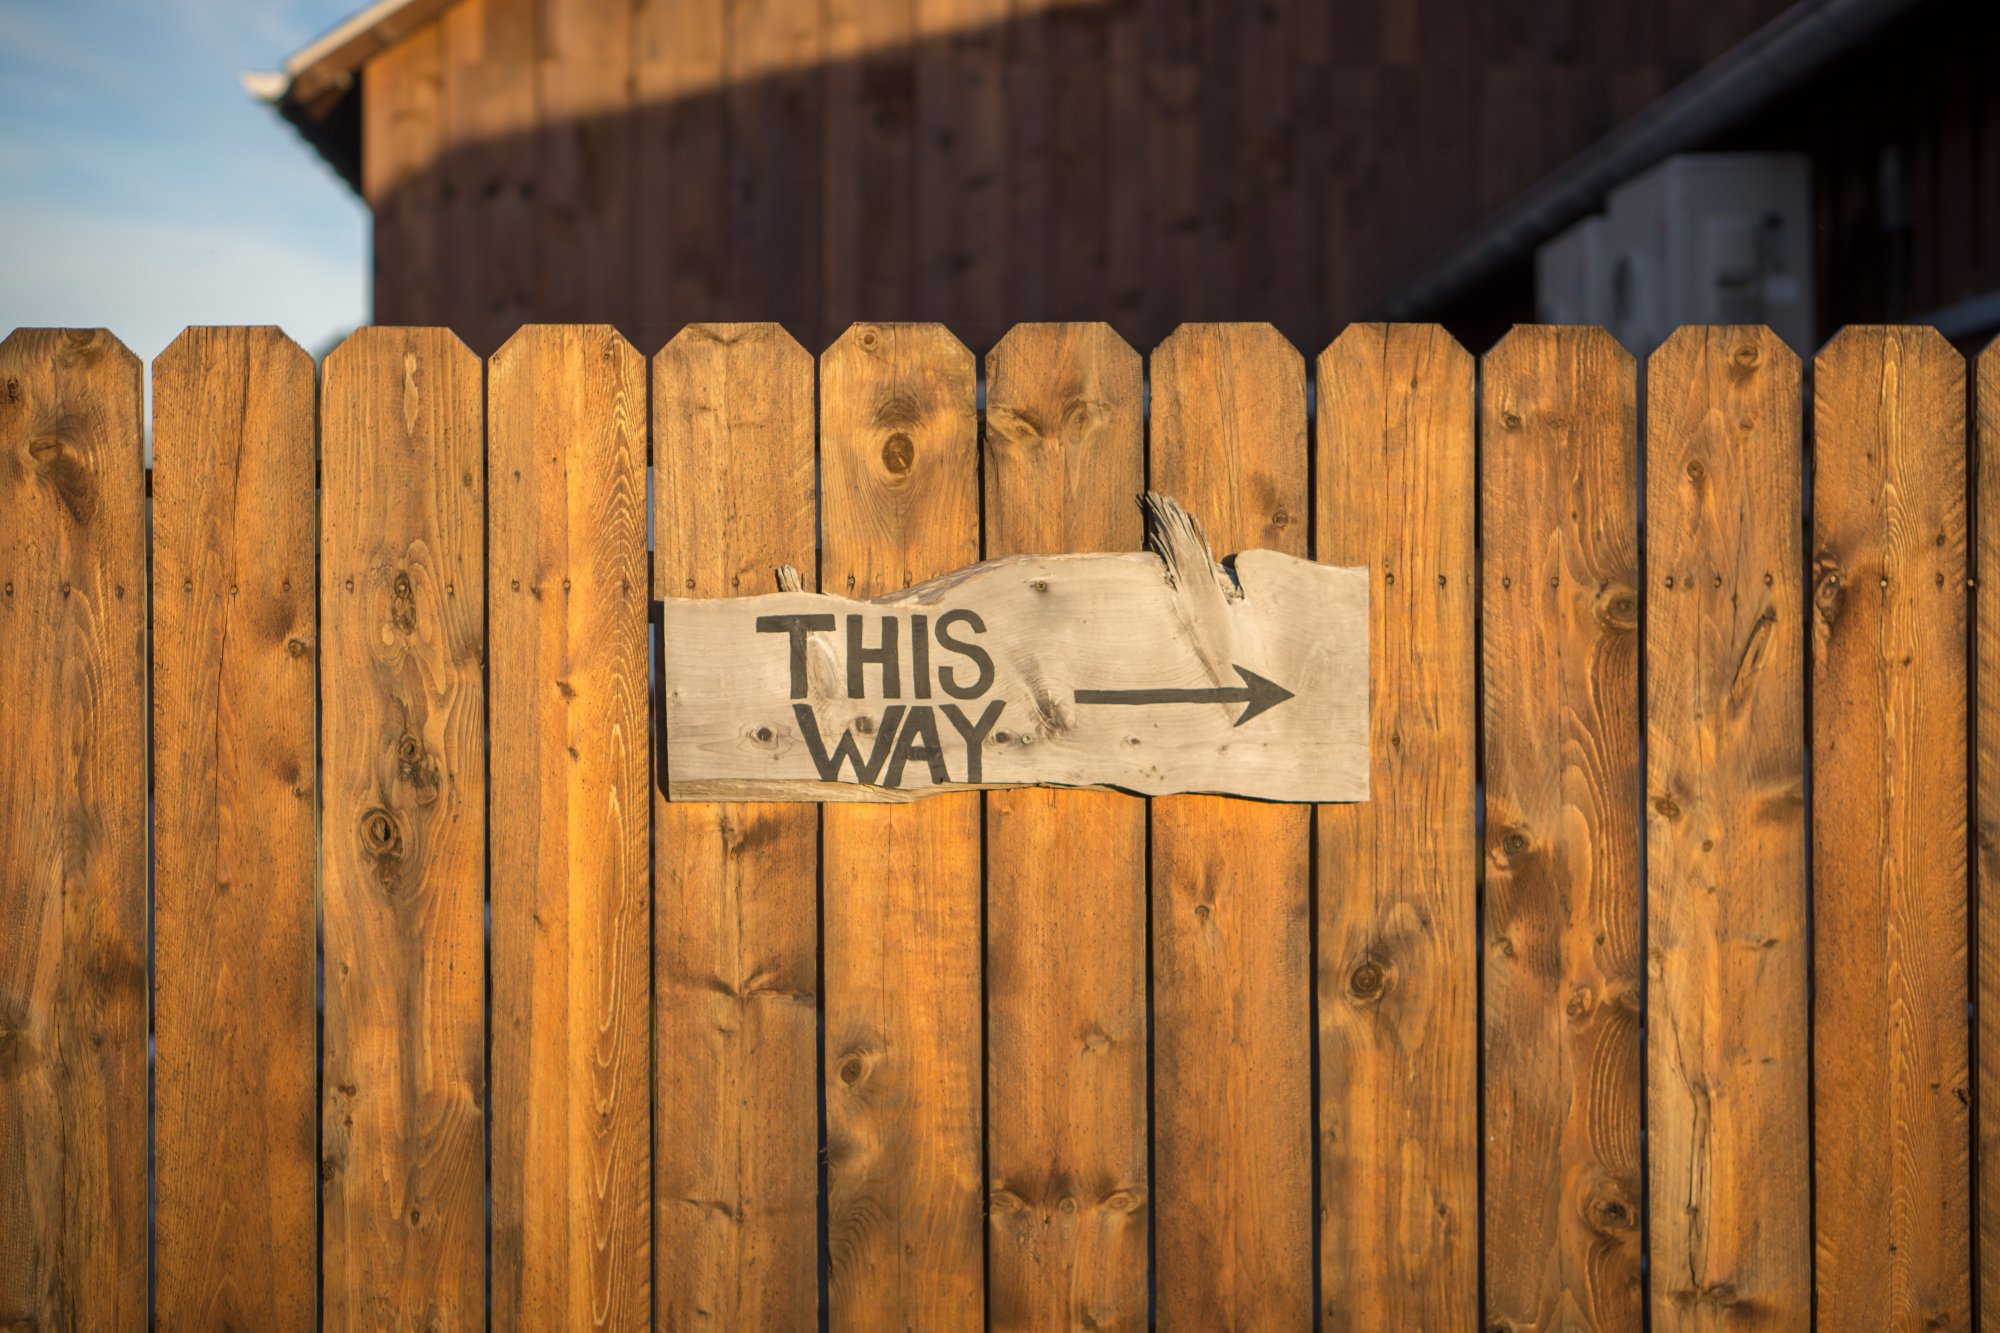 A wooden fence with a sign saying ‘This Way’ with a directional arrow.